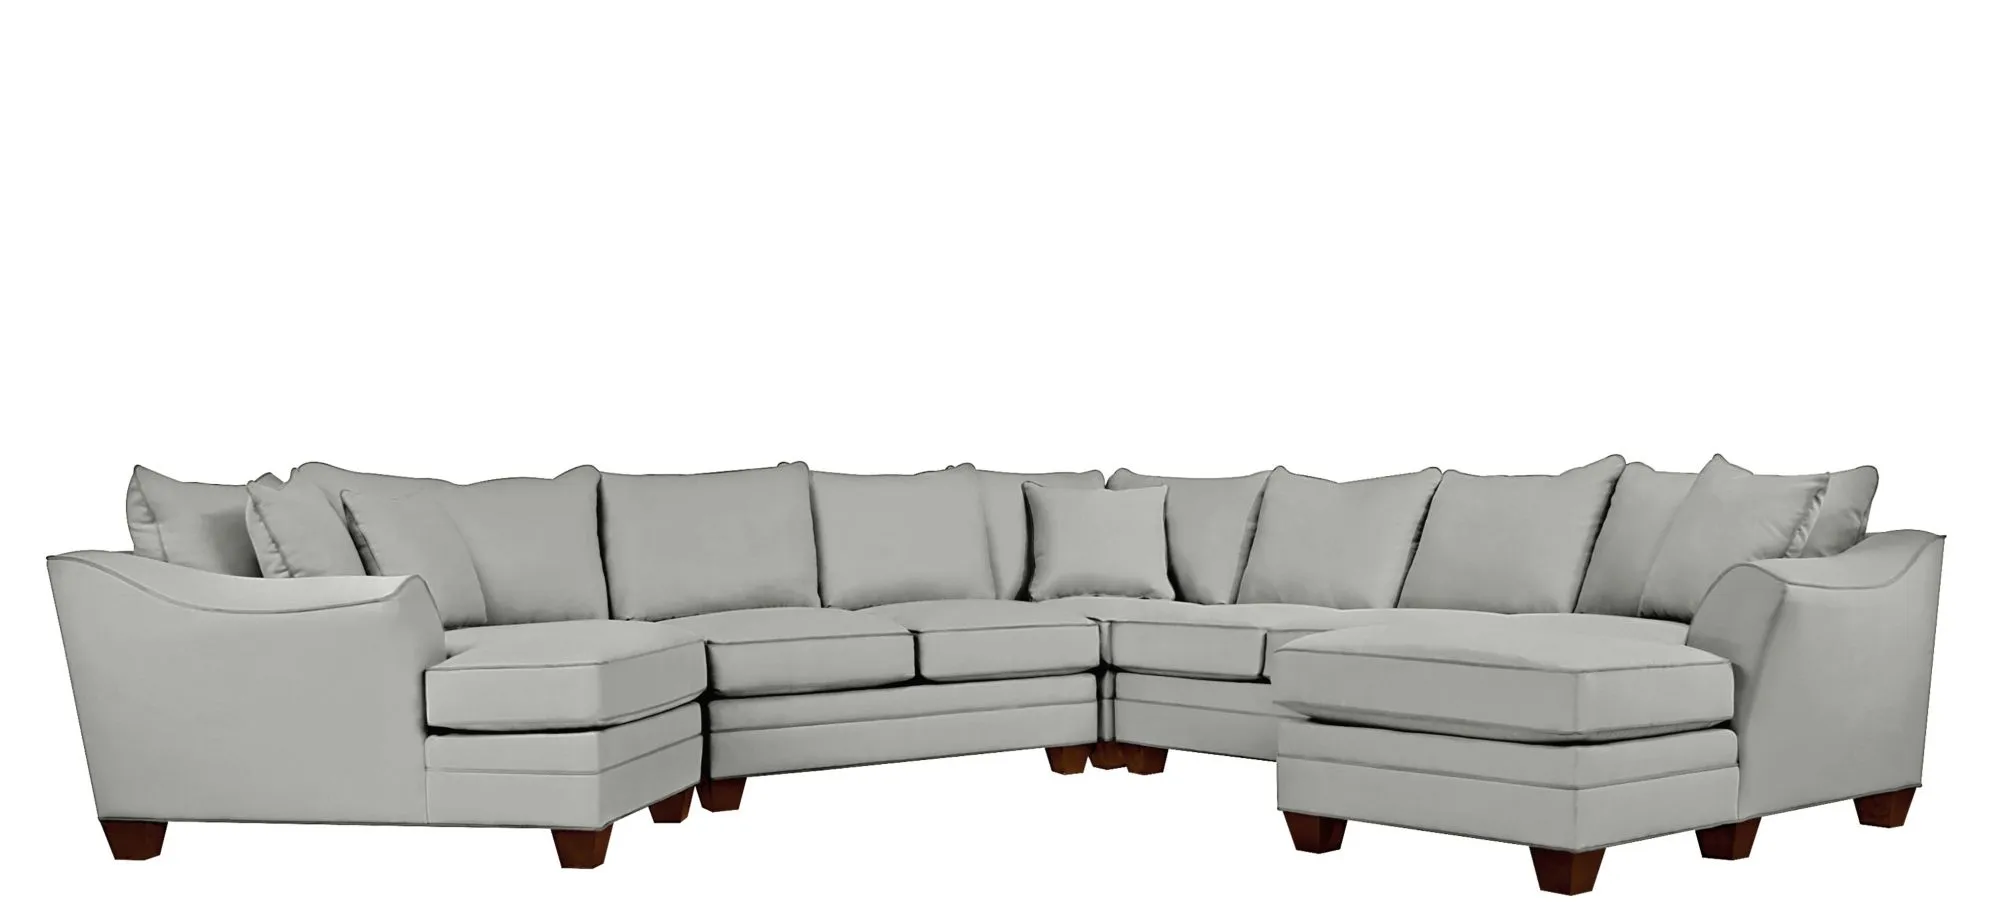 Foresthill 5-pc. Right Hand Facing Sectional Sofa in Suede So Soft Platinum by H.M. Richards